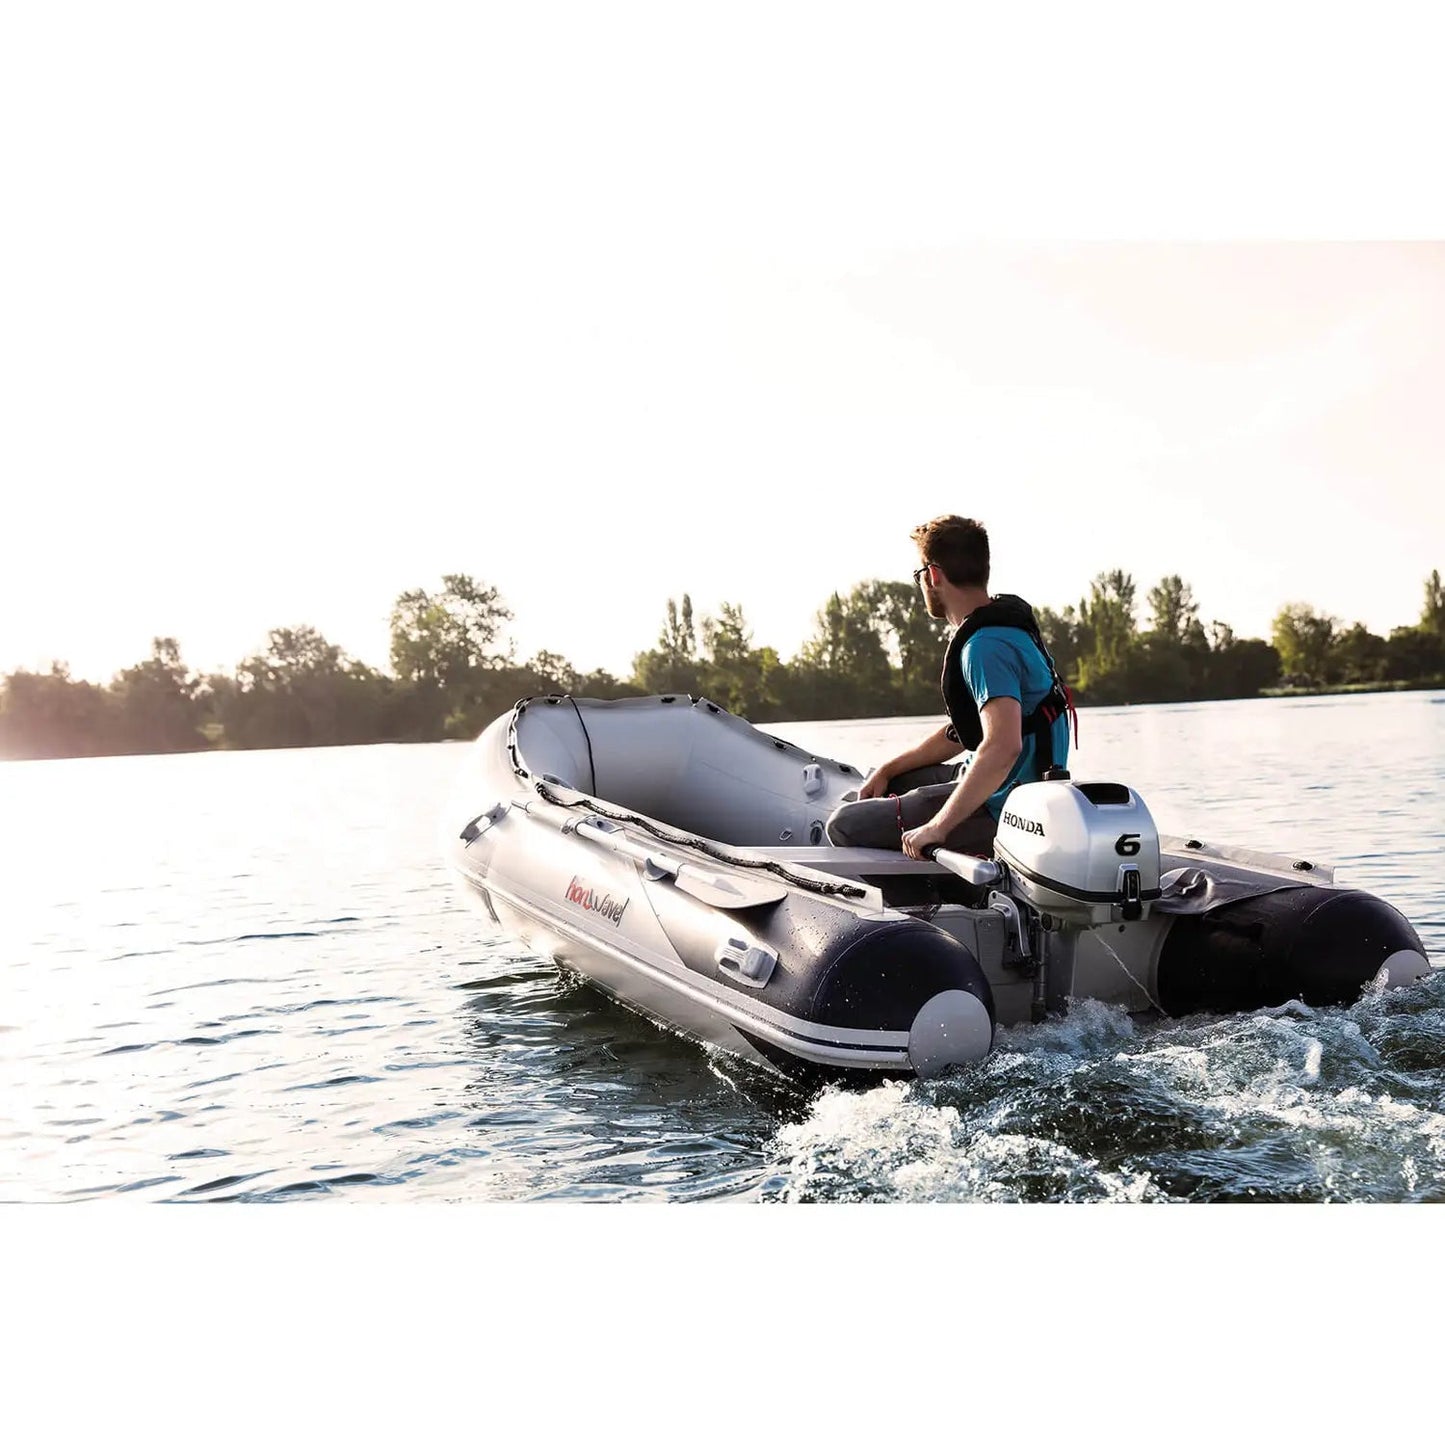 Honwave Package - T32IE3 3.2m Inflatable Boat Dinghy Air V-Floor & Honda Bf10 10hp Outboard Engine